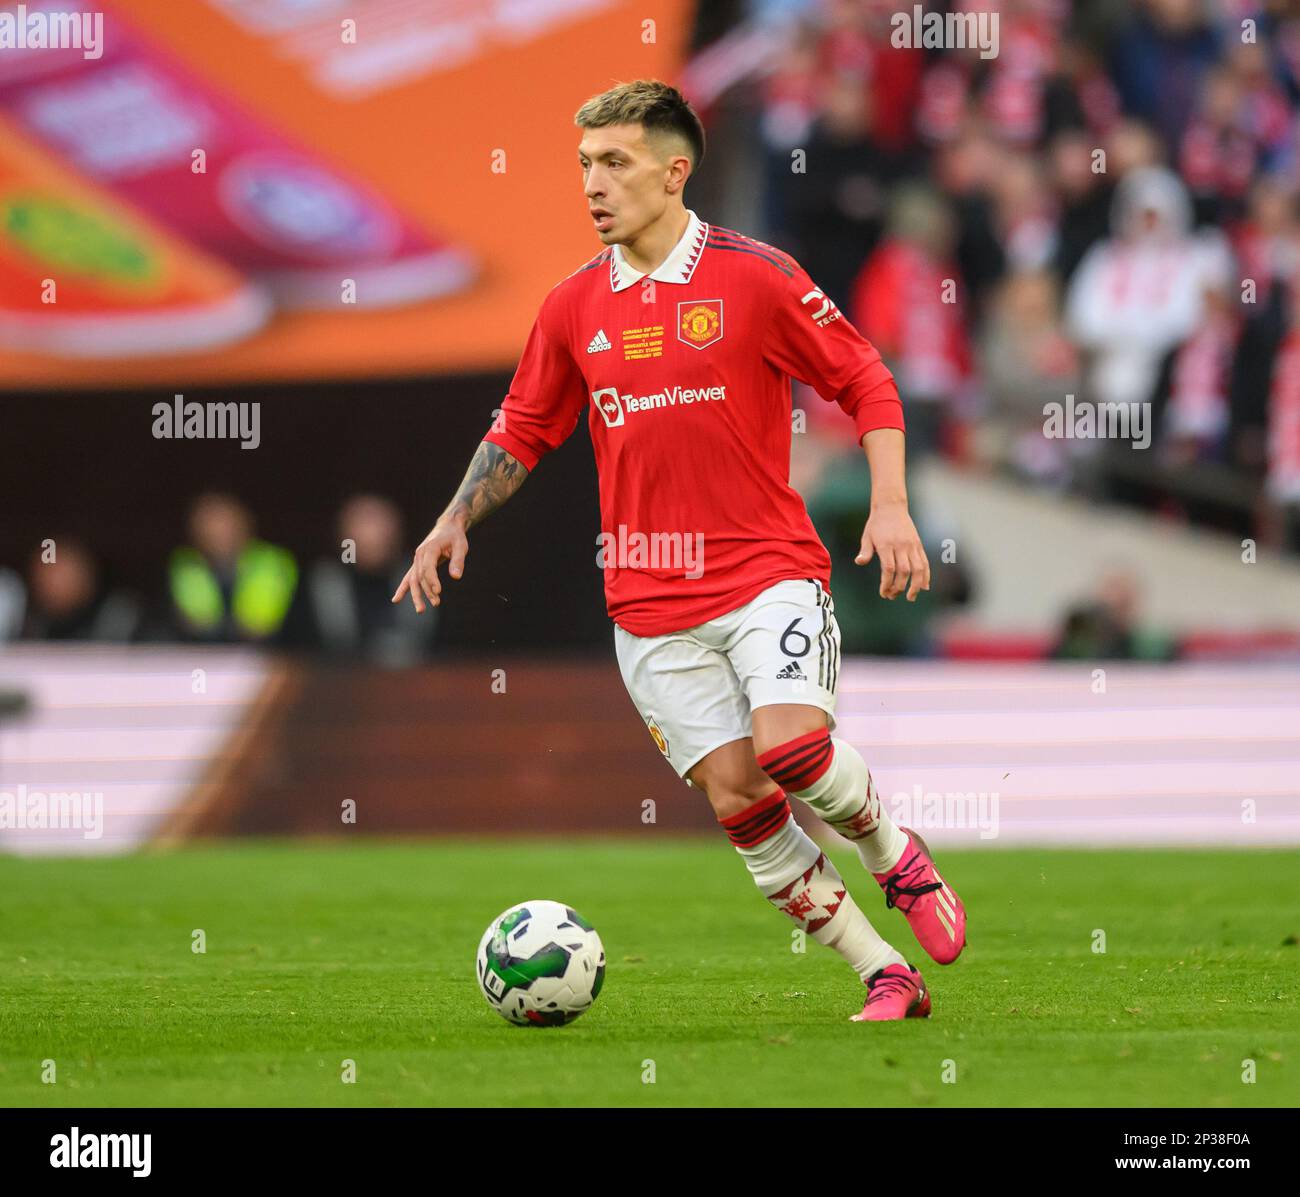 26 Feb 2023 - Manchester United v Newcastle United - Carabao Cup - Final - Wembley Stadium  Manchester United's Lisandro Martinez during the Carabao Cup Final. Picture : Mark Pain / Alamy Live News Stock Photo